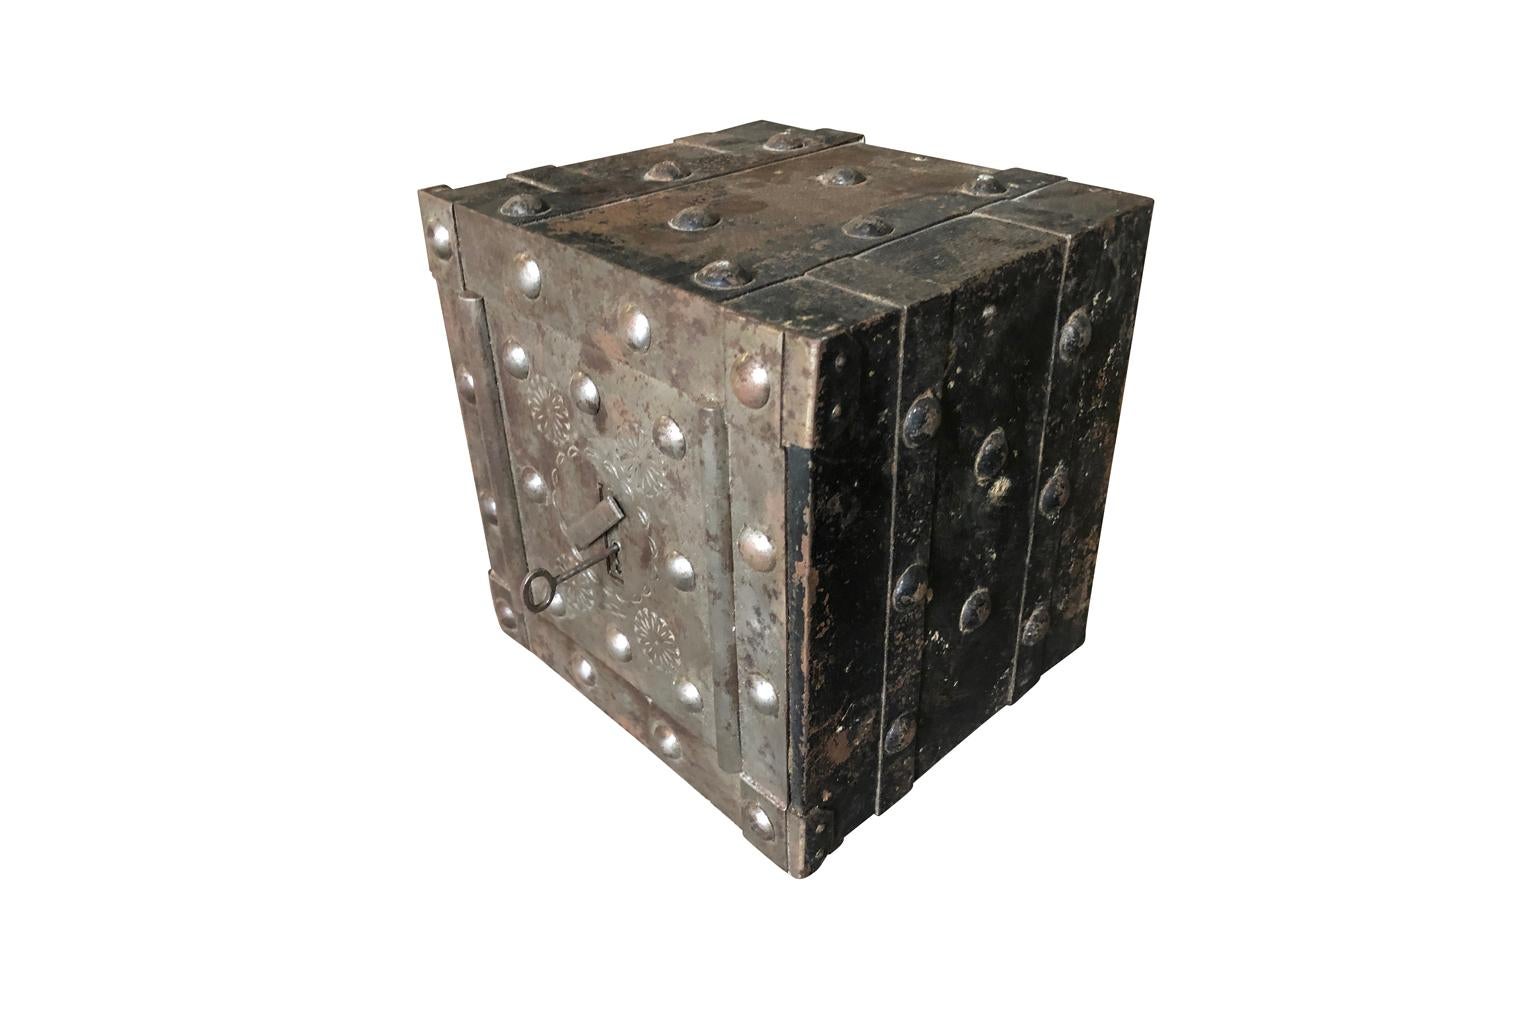 A very handsome early 19th century strong box in iron from Northern Italy. Wonderfully constructed with iron straps and clavos and the original key. Its nice smaller size makes it perfect for an accent piece to sit atop a dresser, desk or place in a